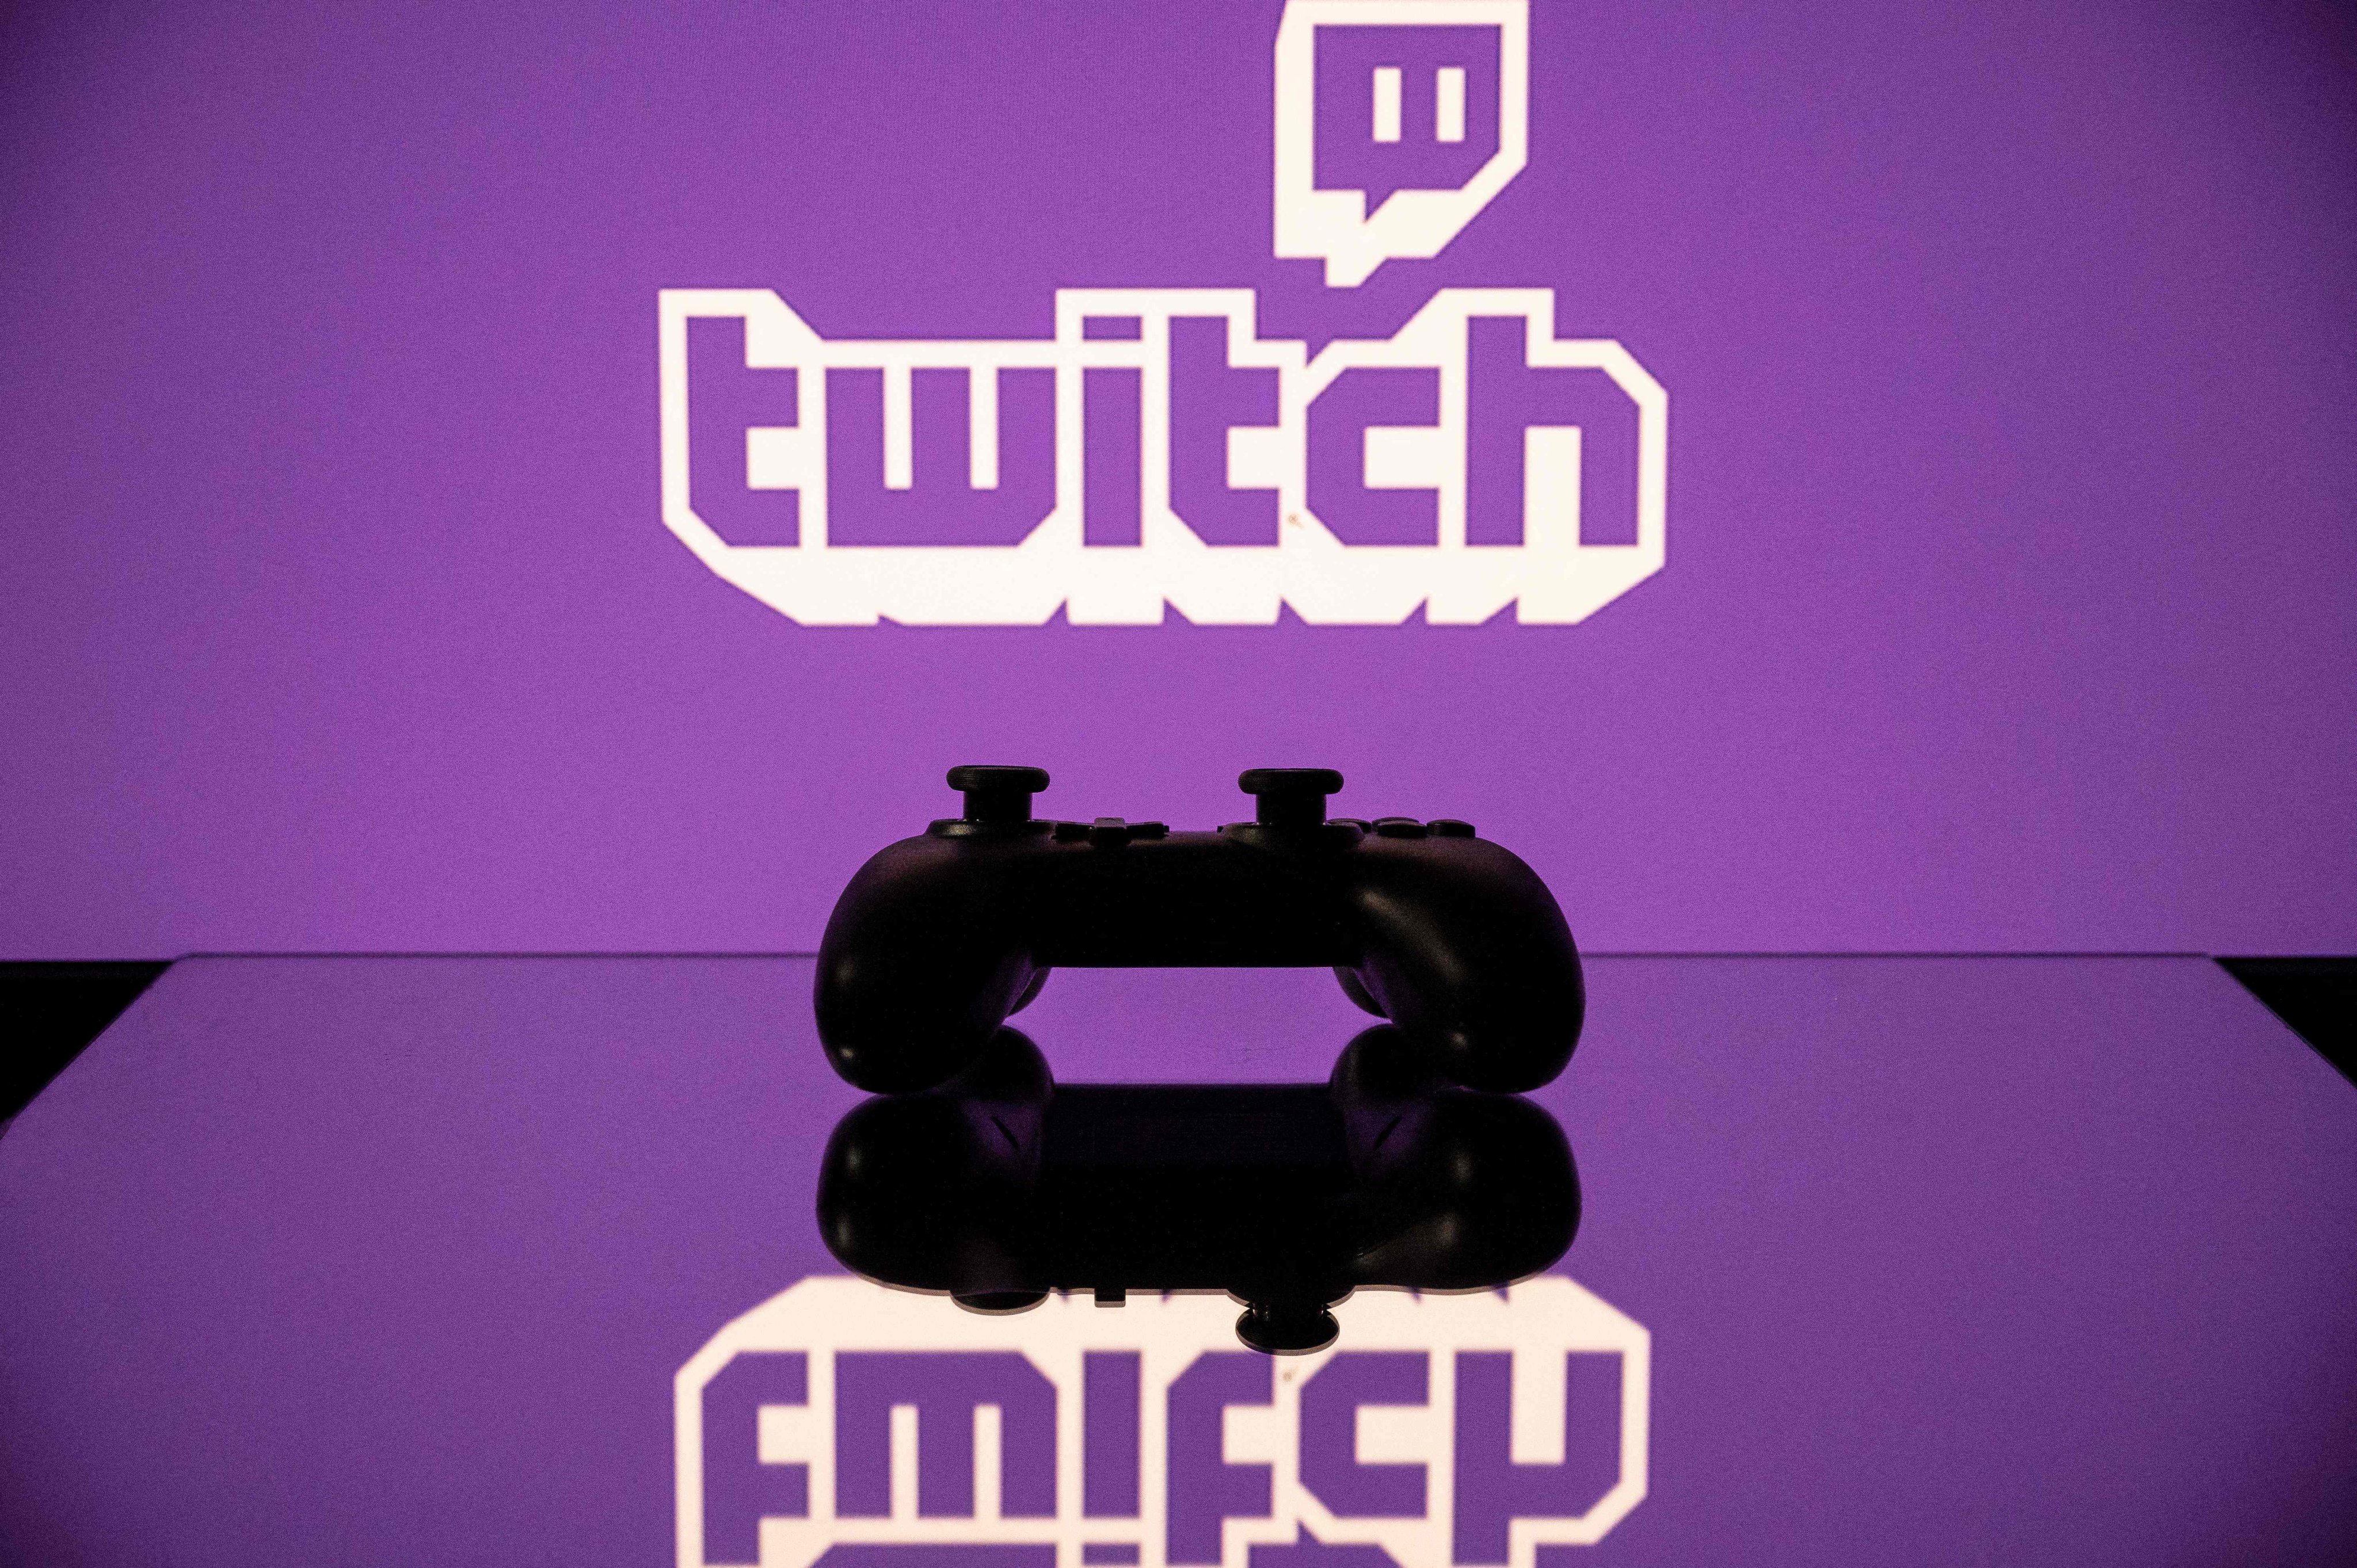 Twitch, best known for live streams of video games, is launching a short video feature just as TikTok faces a ban in the US. Photo: AFP